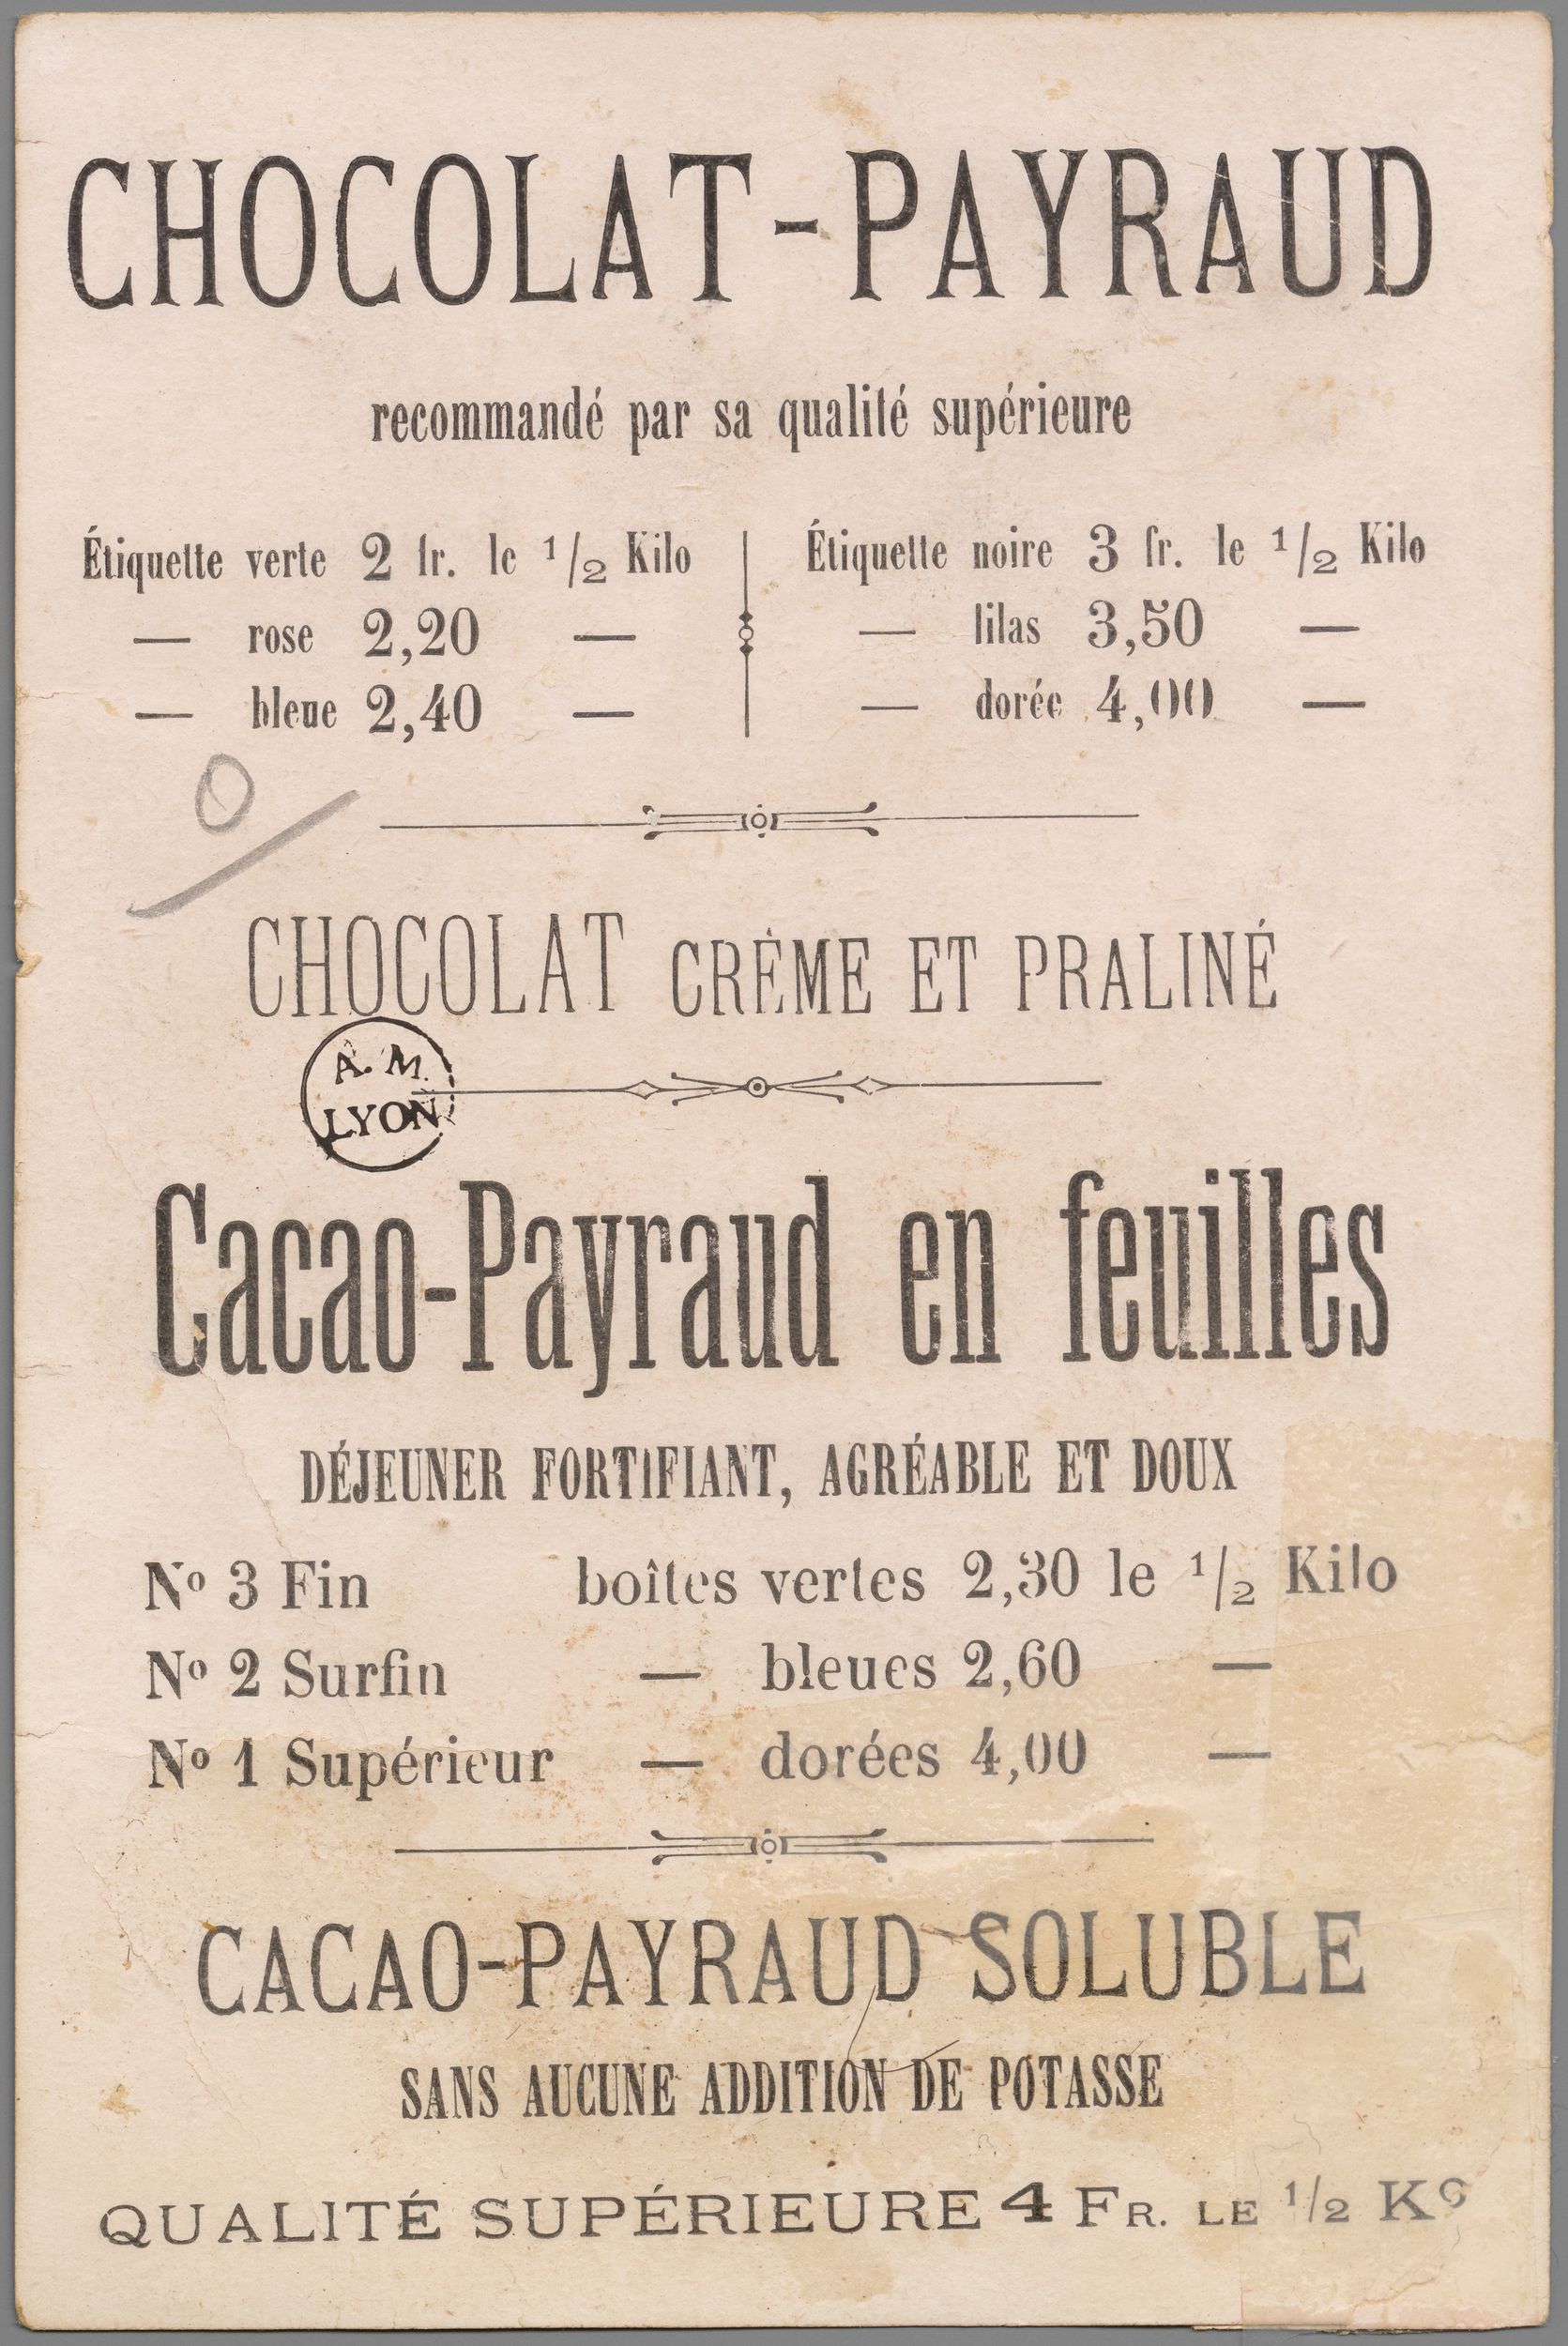 Chocolat-Payraud, cacao-Payraud en feuilles et cacao-Payraud soluble : chromolithographie publicitaire NB (fin XIXe, cote : 10FI/40)